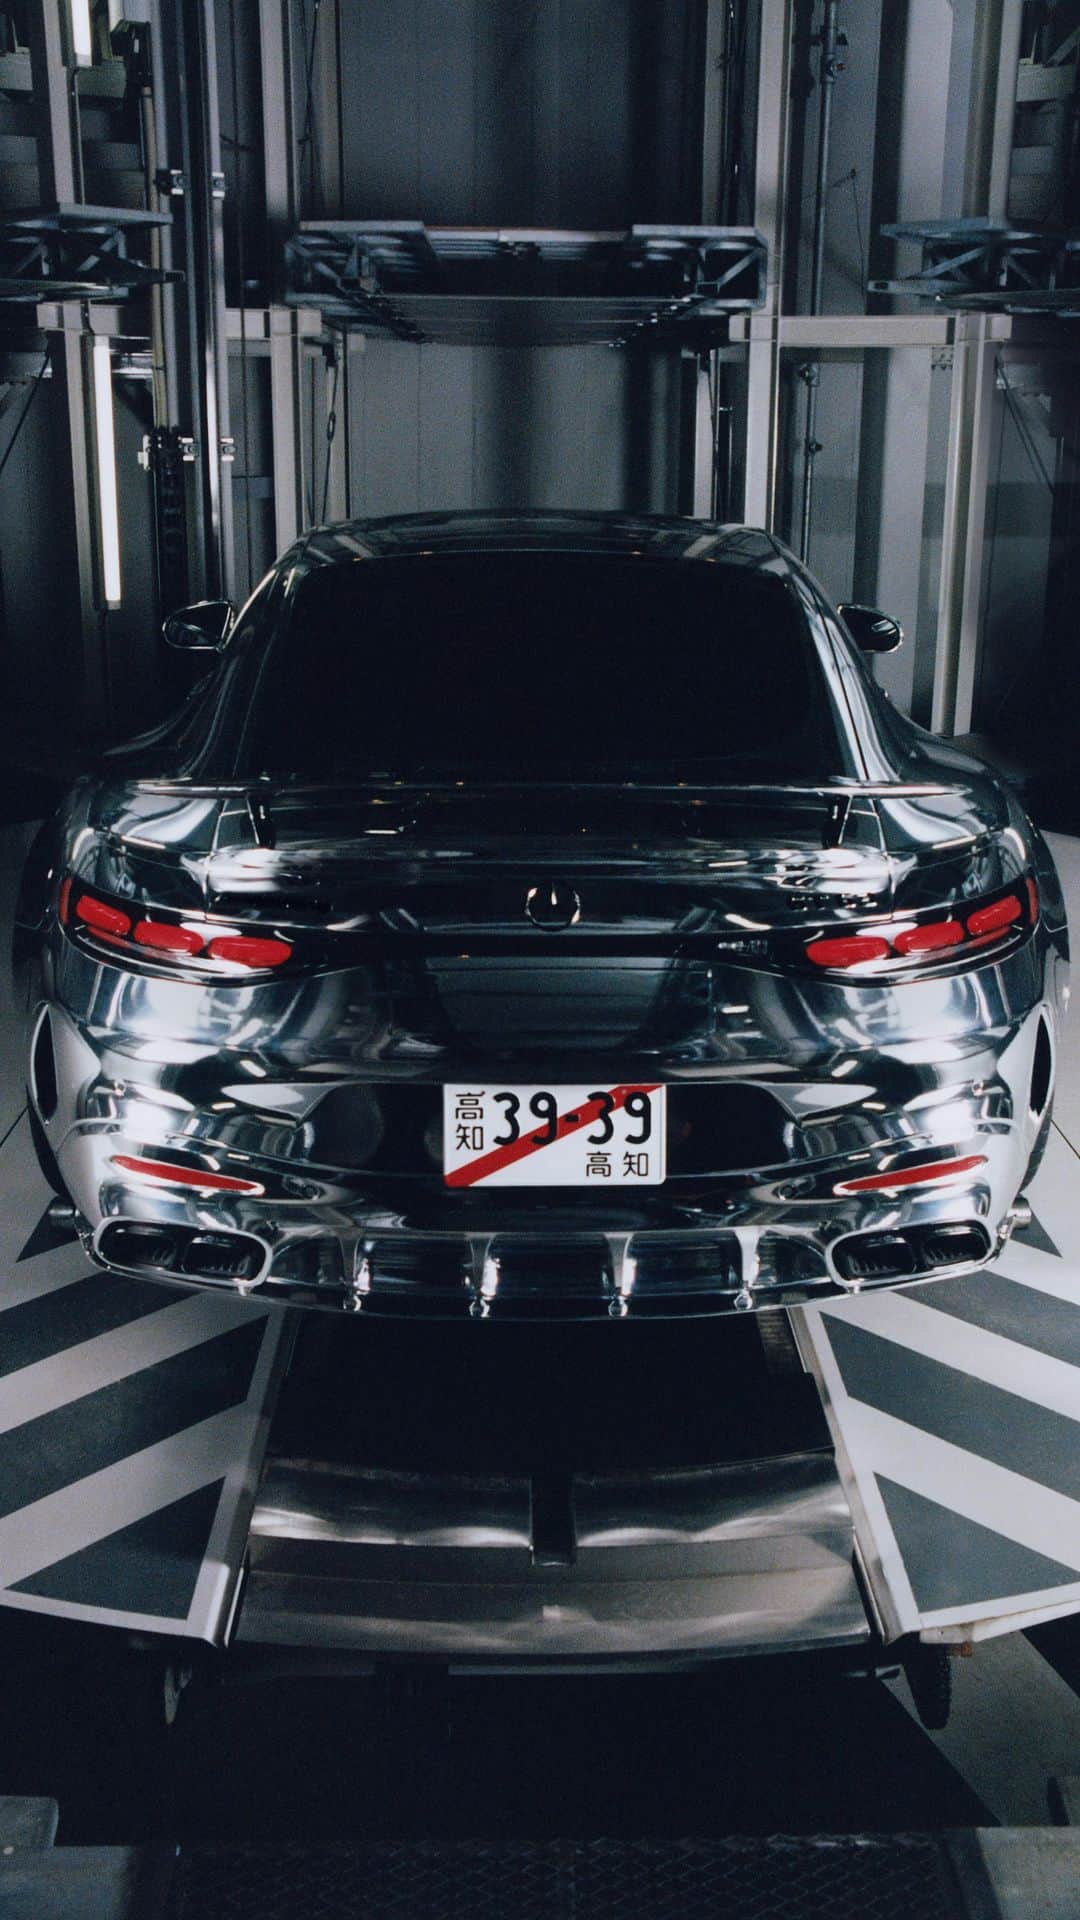 sacaiのインスタグラム：「Tradition fused with progression.  In collaboration with @sacaiofficial, we’re unveiling a luxury capsule collection that merges innovation and timelessness — complemented by a bespoke wrap for the all-new Mercedes-AMG GT. 🪩  Available exclusively at AMG Speed City in Las Vegas until November 17 and at Nordstrom.com from November 15th.  #MercedesAMG #sacaixAMG #sacai  [Mercedes-AMG GT 63 4MATIC+ | WLTP: Kraftstoffverbrauch kombiniert: 14,1 l/100 km | CO₂-Emissionen kombiniert: 319 g/km | amg4.me/DAT-Leitfaden]」